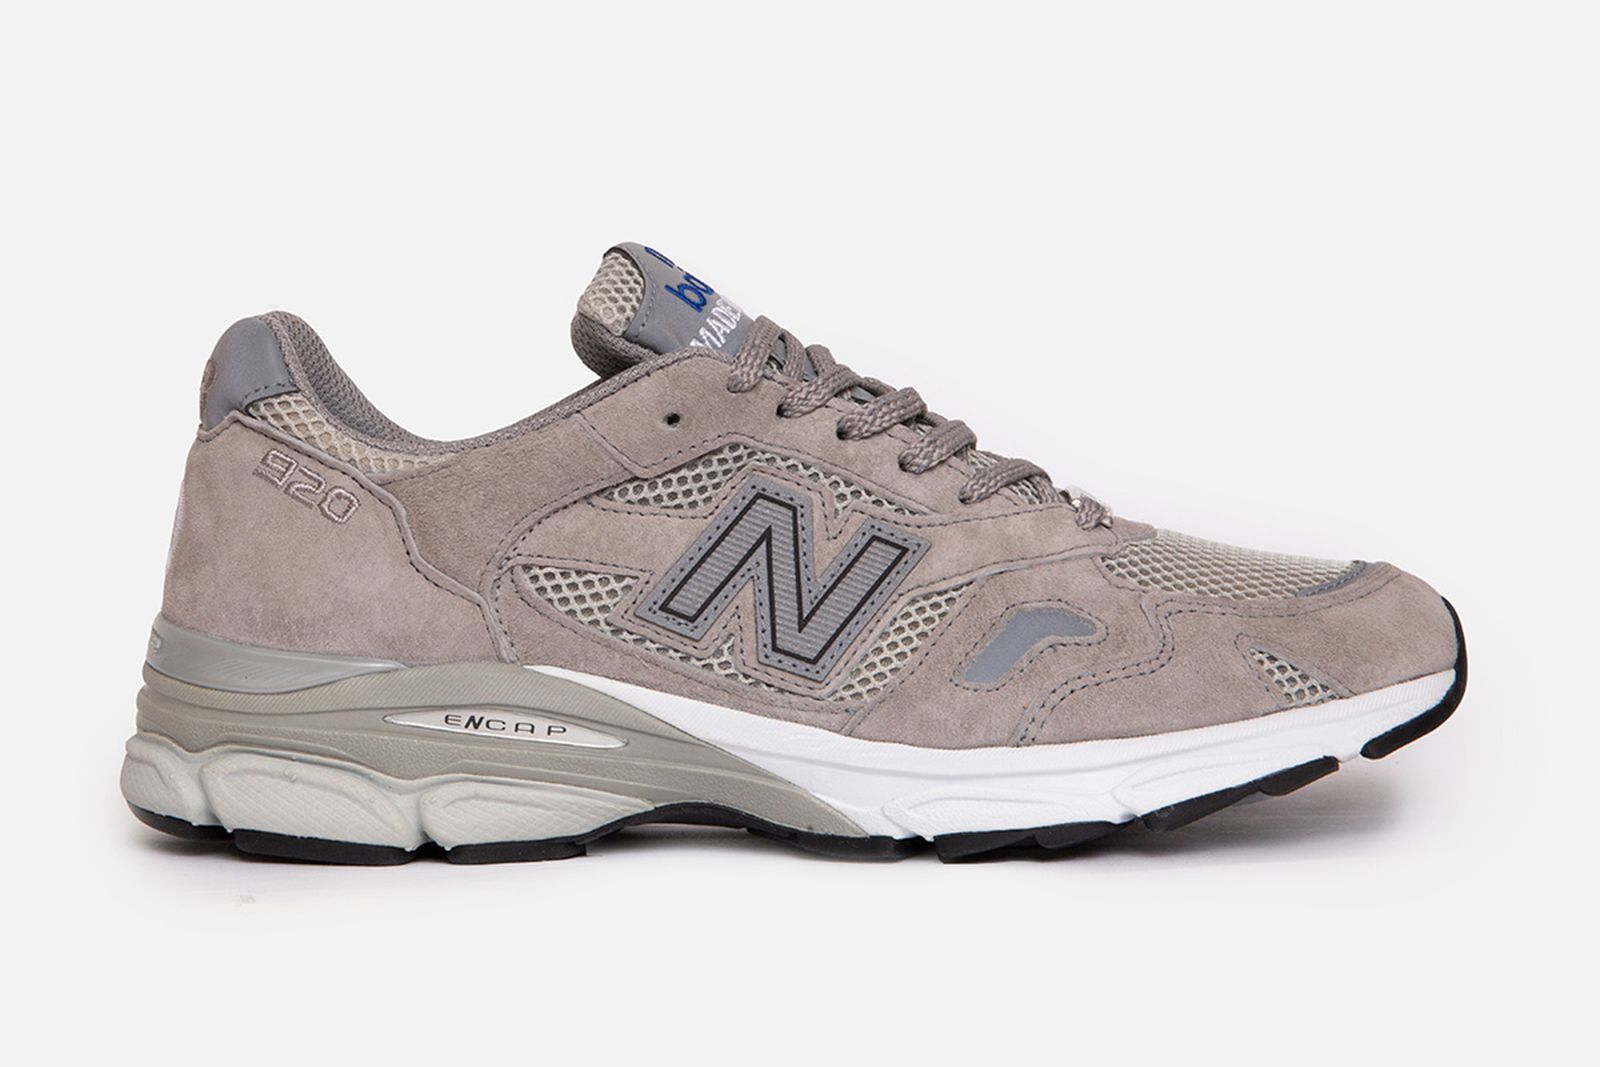 MTA x New Balance 920: Official Images & Release Info